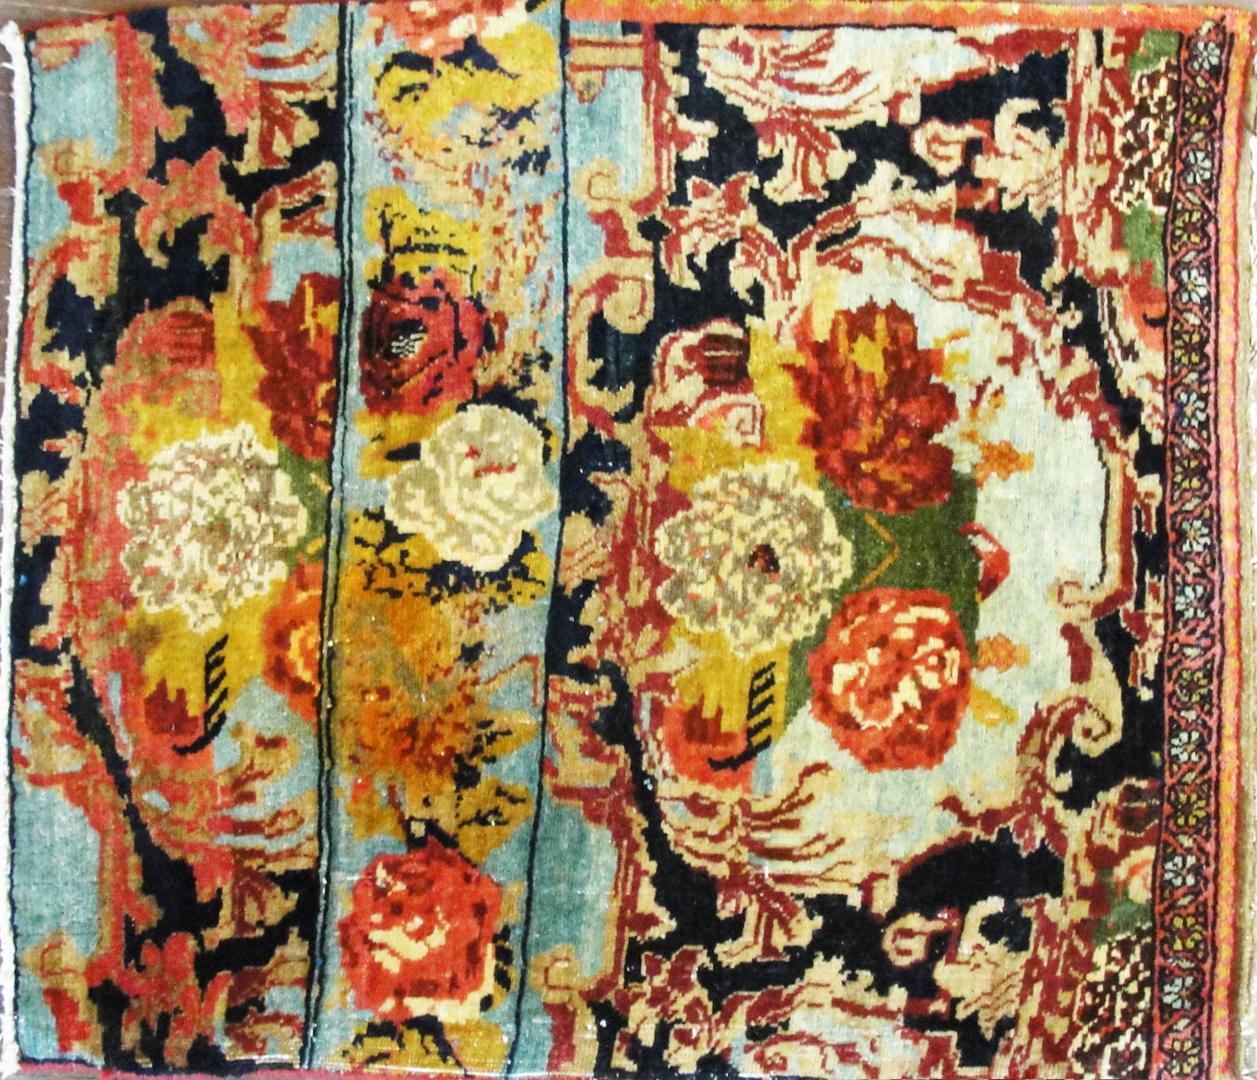 The wagireh or sampler is perhaps the most enigmatic of carpets. Made as a template or pattern for the carpet design and production of larger rugs, they are generally small pieces the size of a scatter rug or mat.